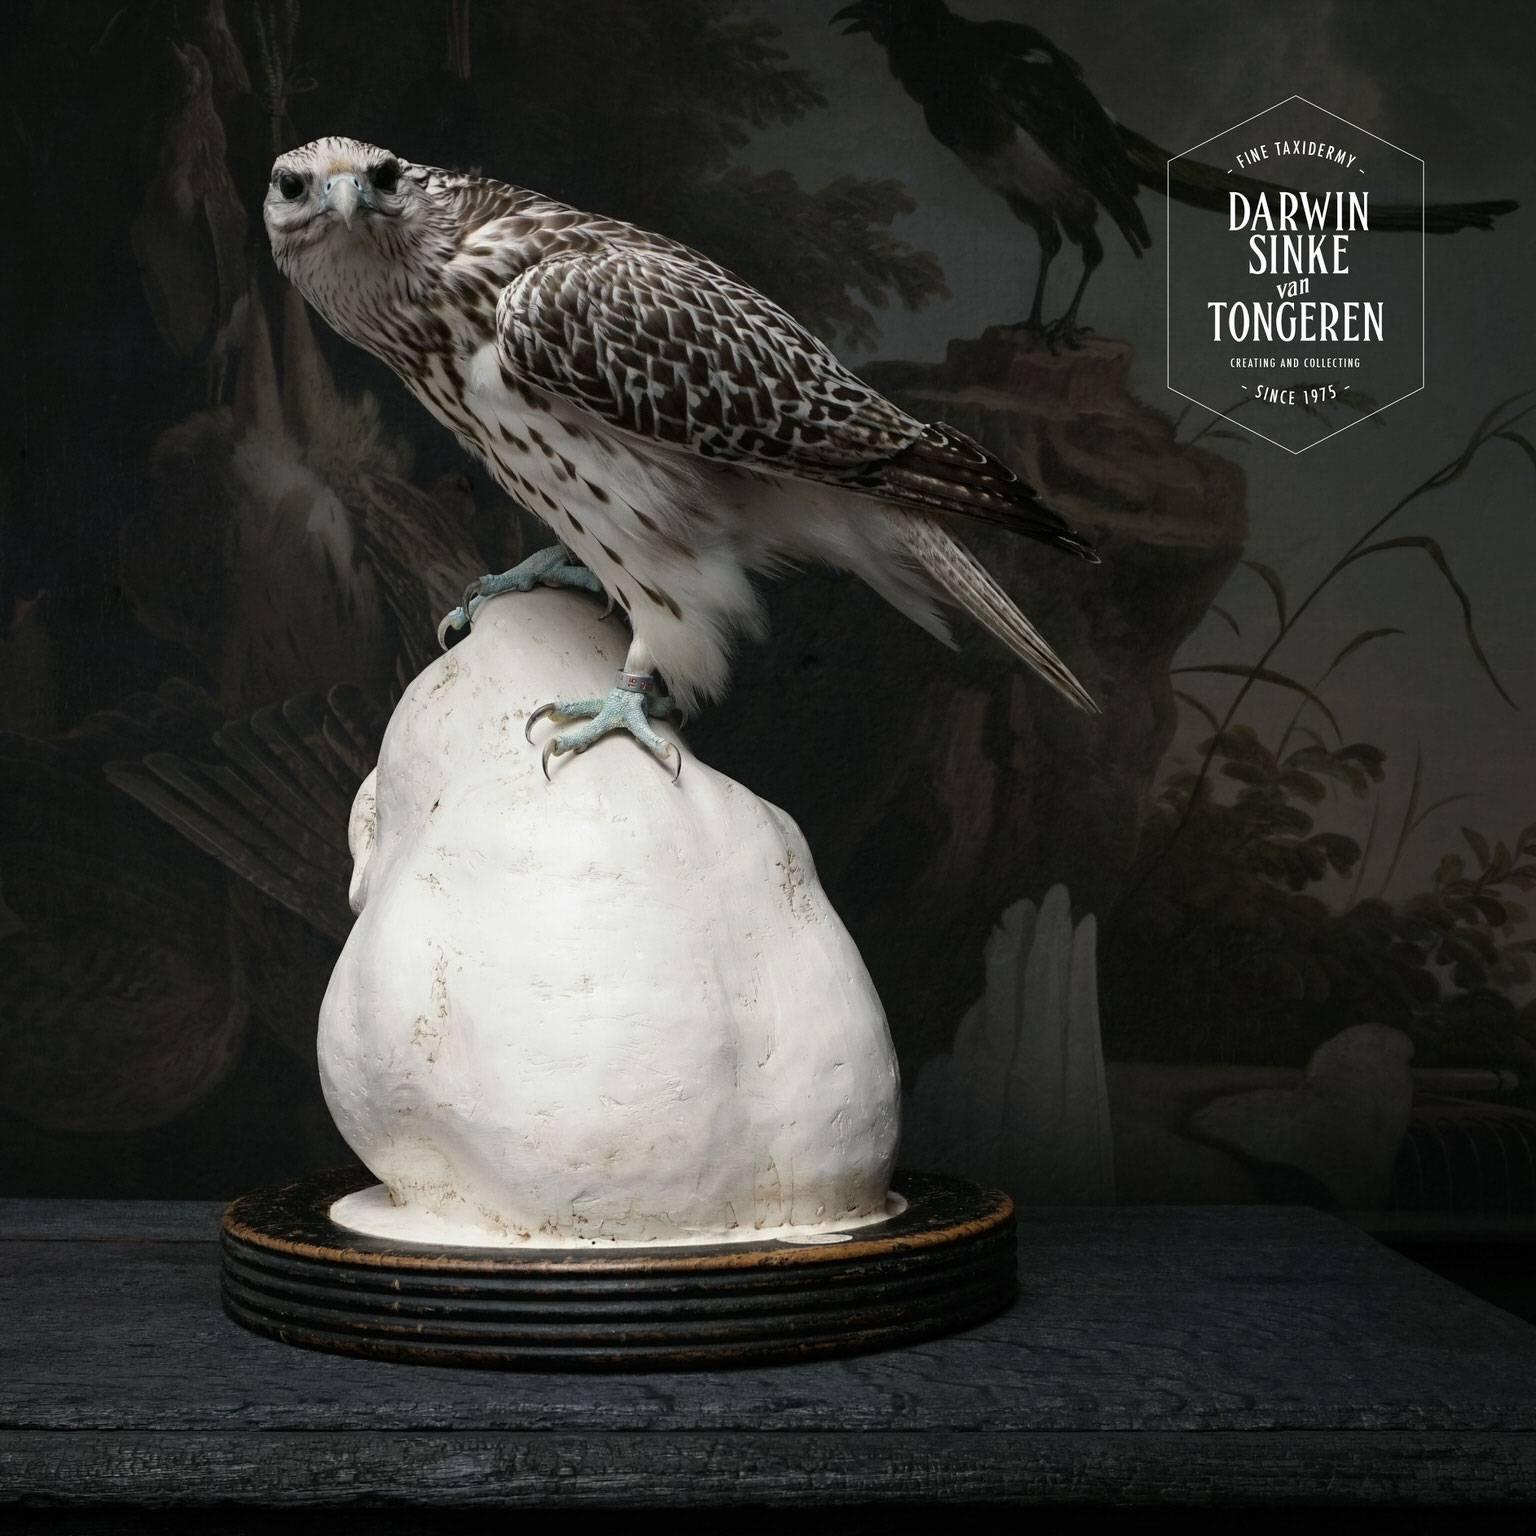 A Gyrfalcon sitting atop a Sinke and van Tongeren sculpture of a tigers head. Made of unfired clay and plaster sculpted especially for this Falcon. Like a TOTEM of predators. Gyrfalcons are the largest of the falcon species. It breeds on Arctic